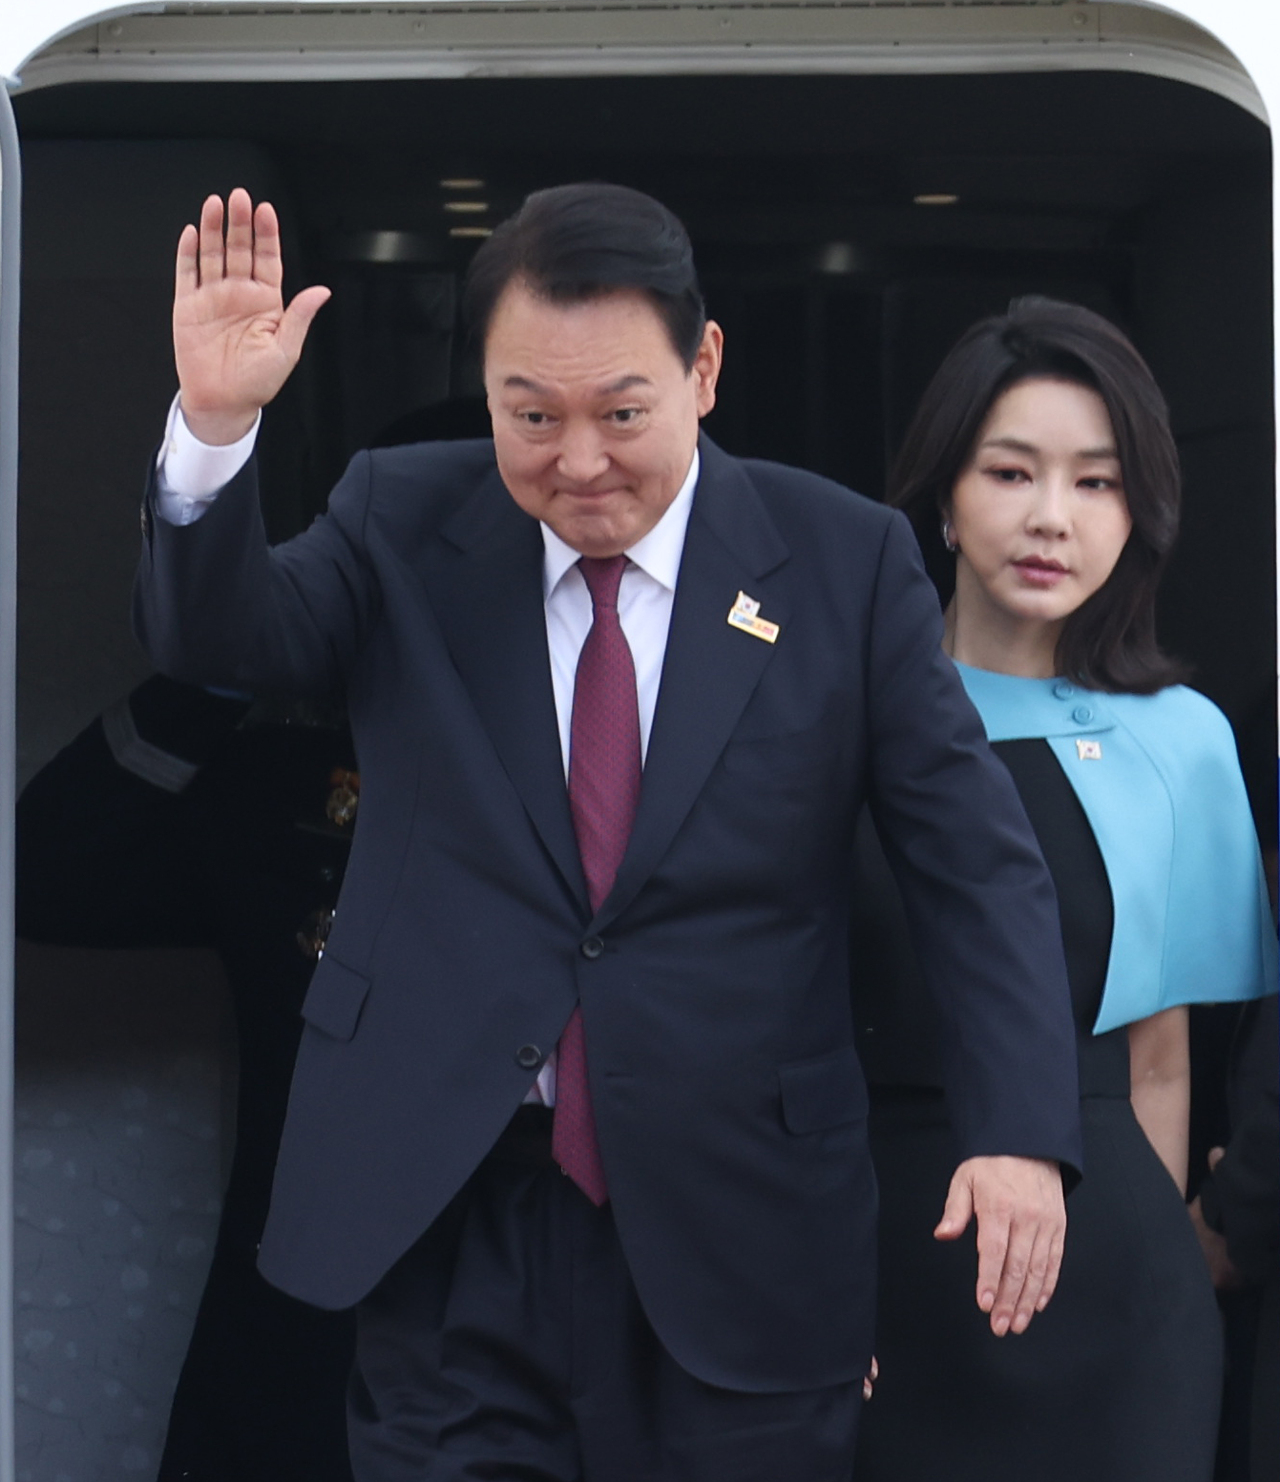 After a five-day trip to the NATO summit held in Madrid, Spain, President Yoon Suk-yeol and Kim Keon-hee arrive at Seoul Airport in Seongnam, Gyeonggi Province, on Friday. (Yonhap)